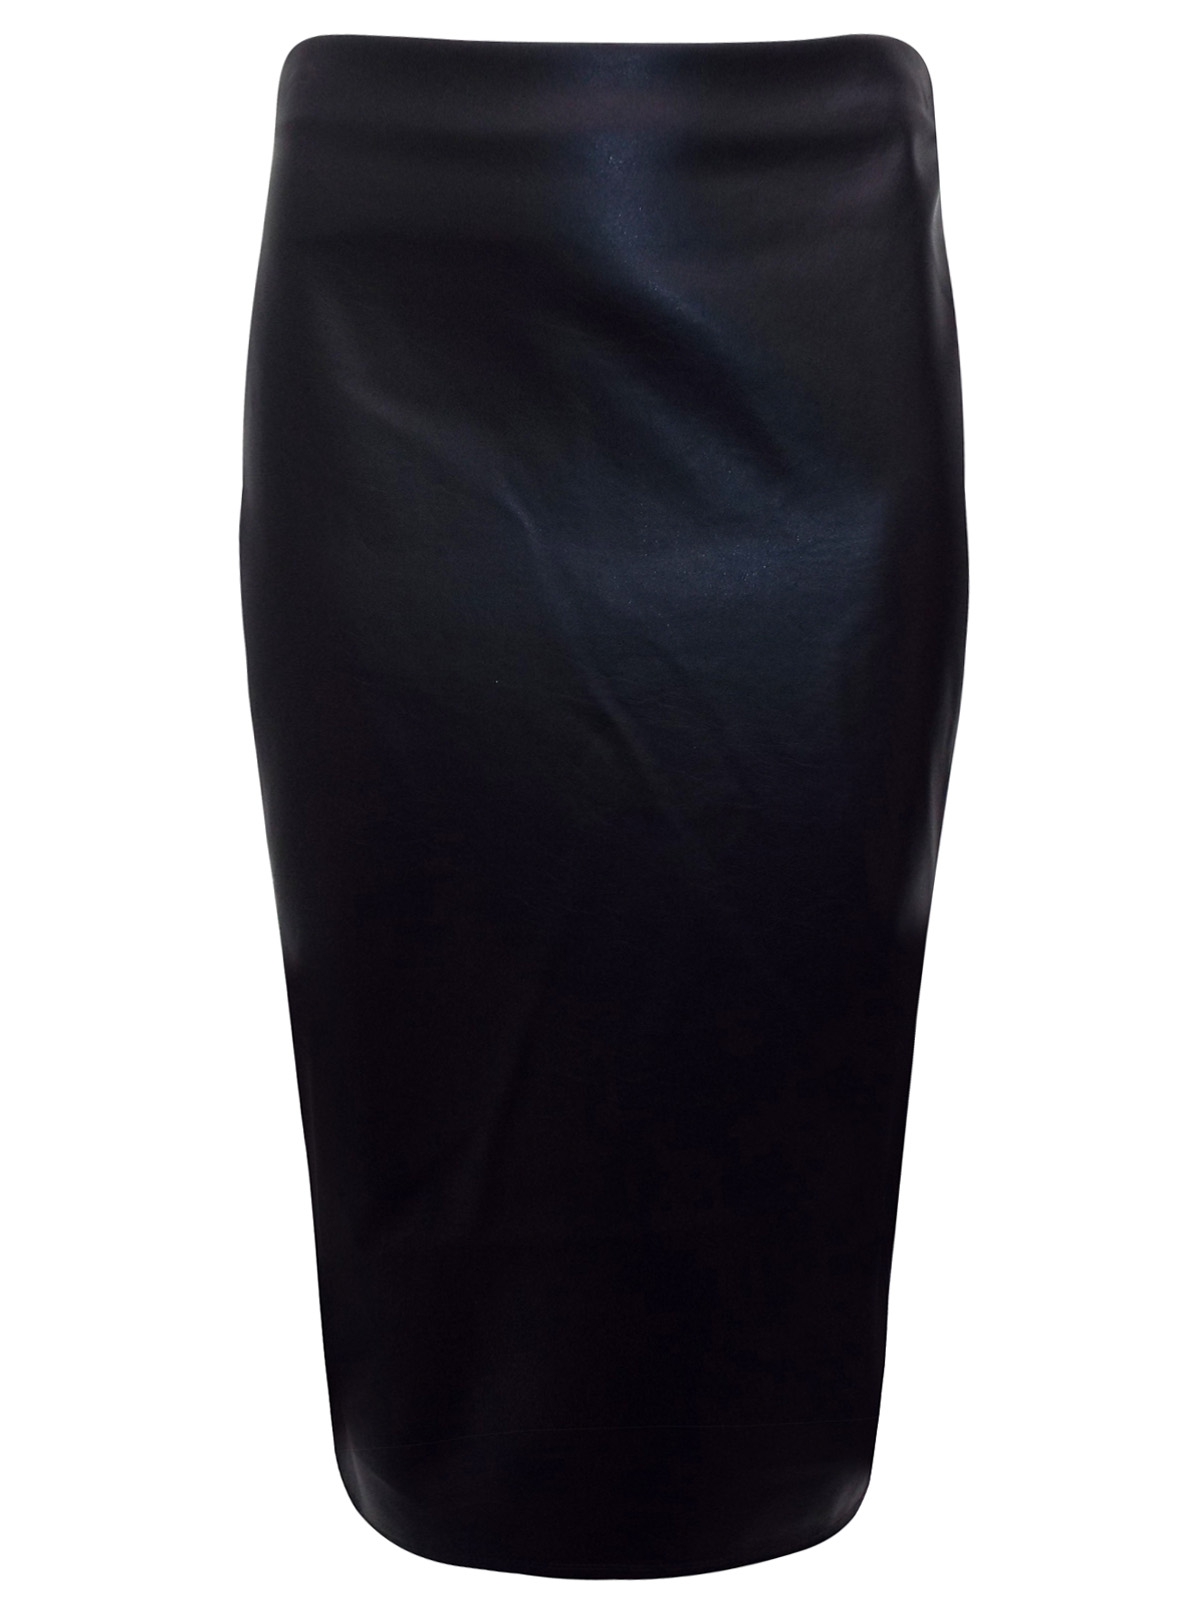 First Avenue BLACK Faux Leather Pencil Skirt - Size 10 to 20